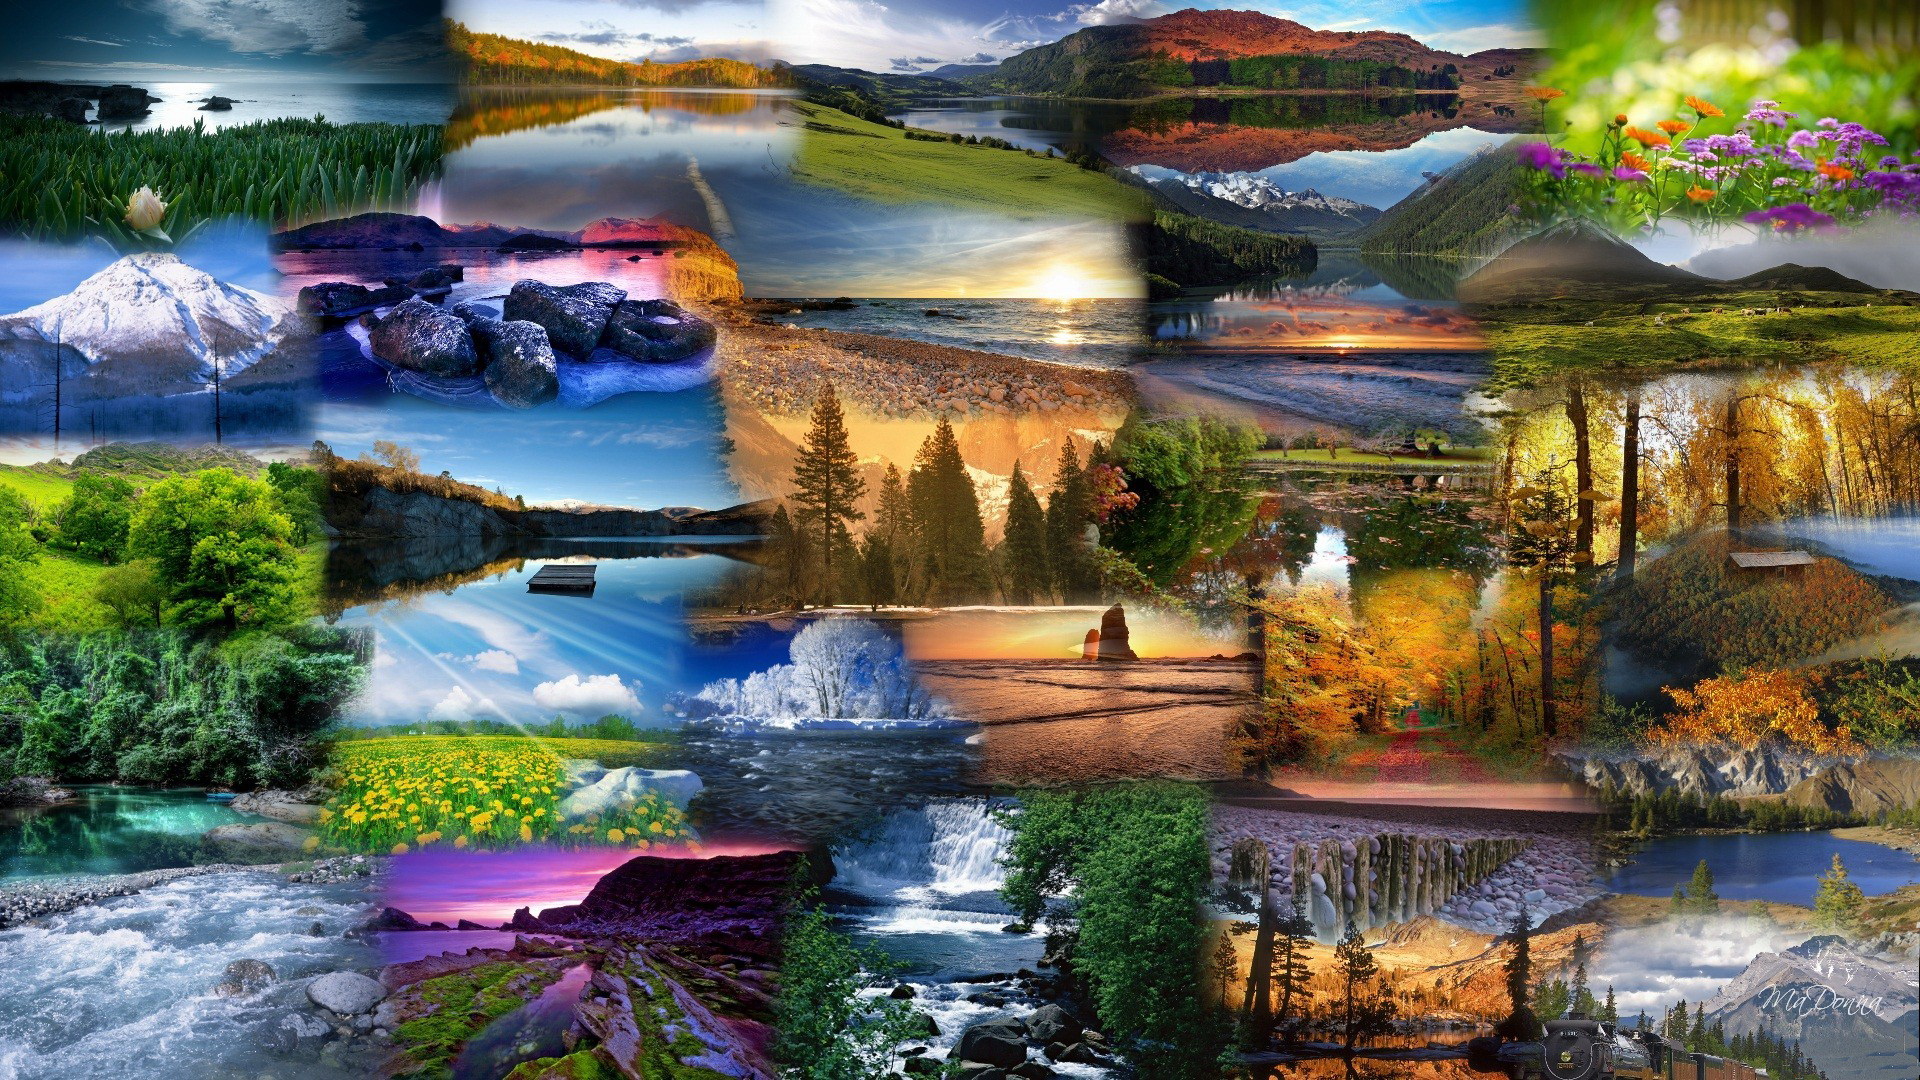 pic collage for pc free download